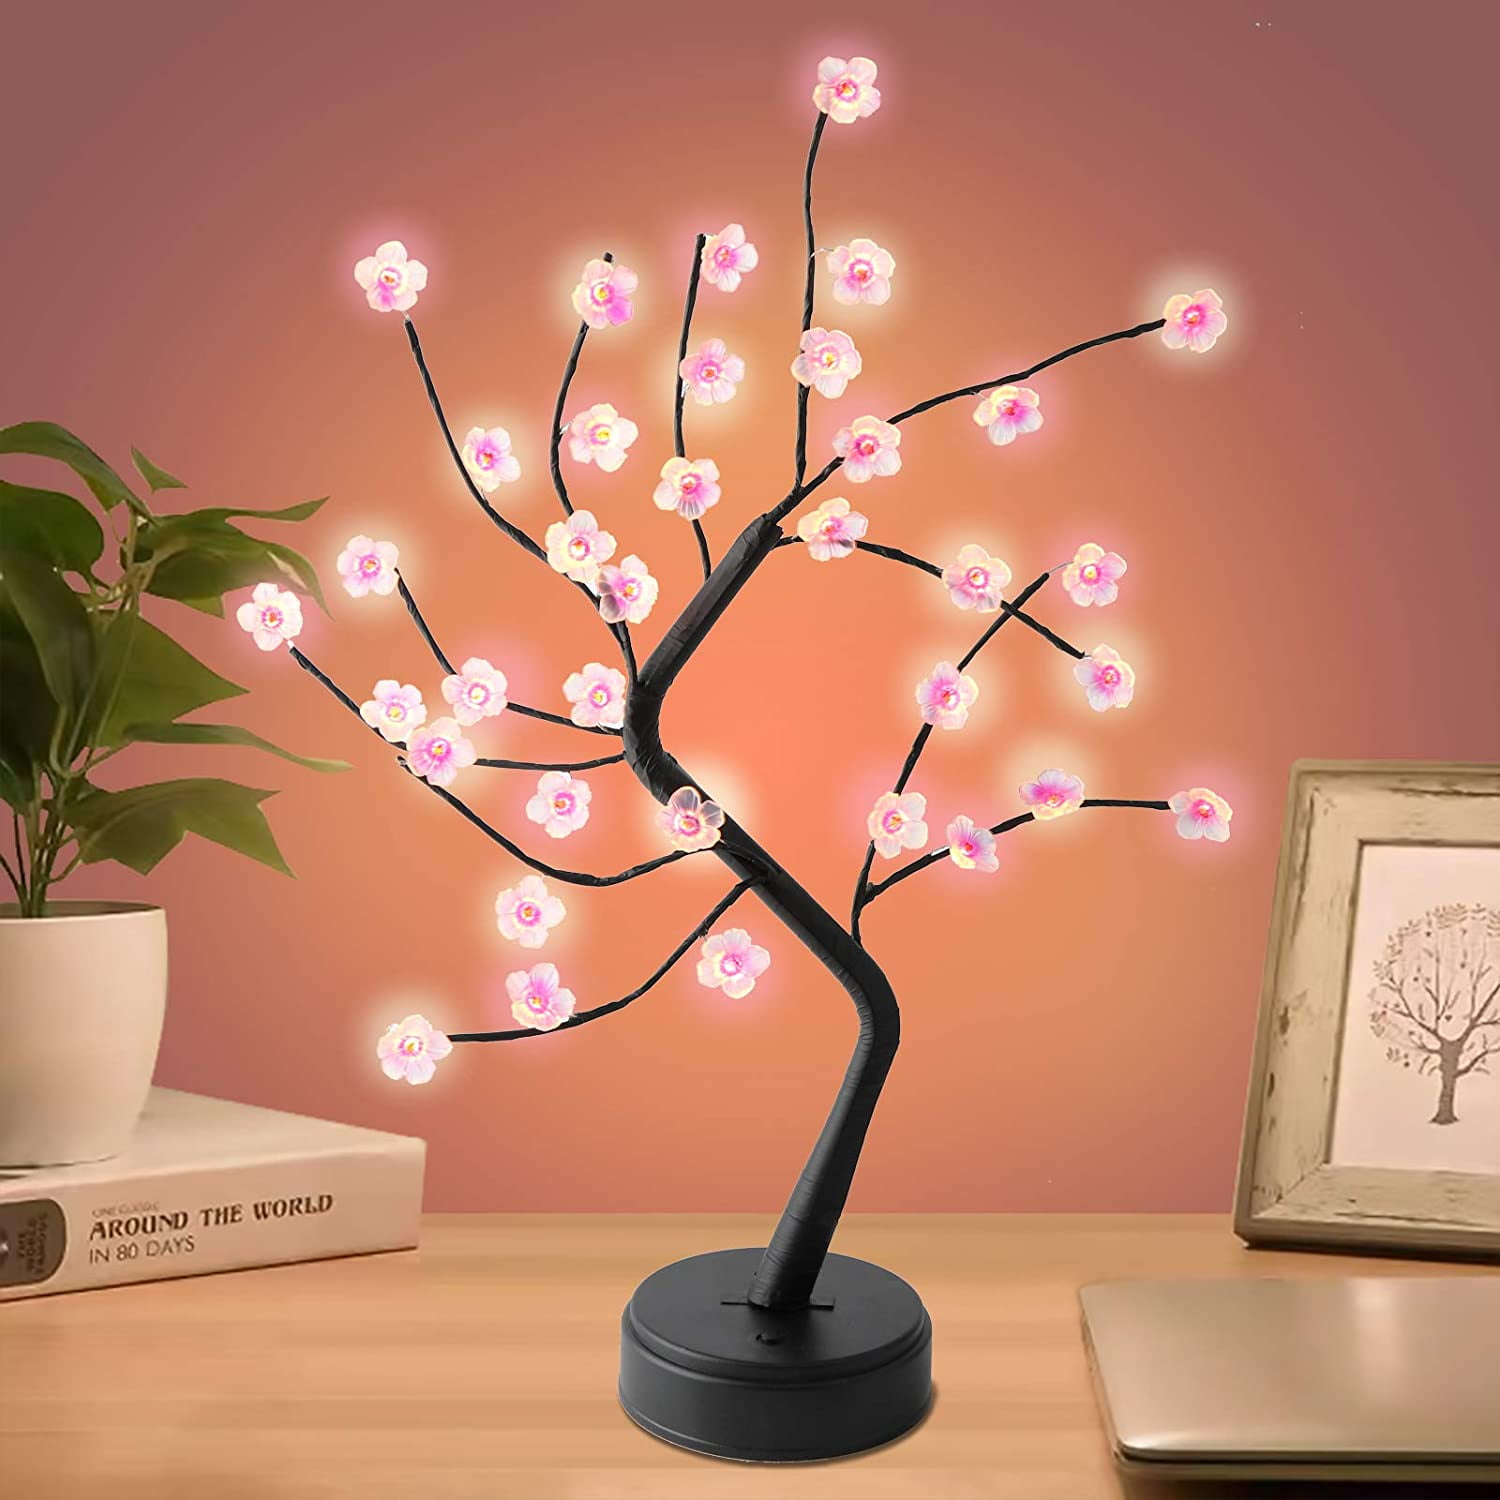 Tabletop Bonsai Tree Light With 35 Led Cherry Blossoms Tree Lamp,Diy Artificial Lamp Tree Or Battery Powered,For Bedroom Desktop Christmas Indoor Decoration Night Light | Walmart Canada